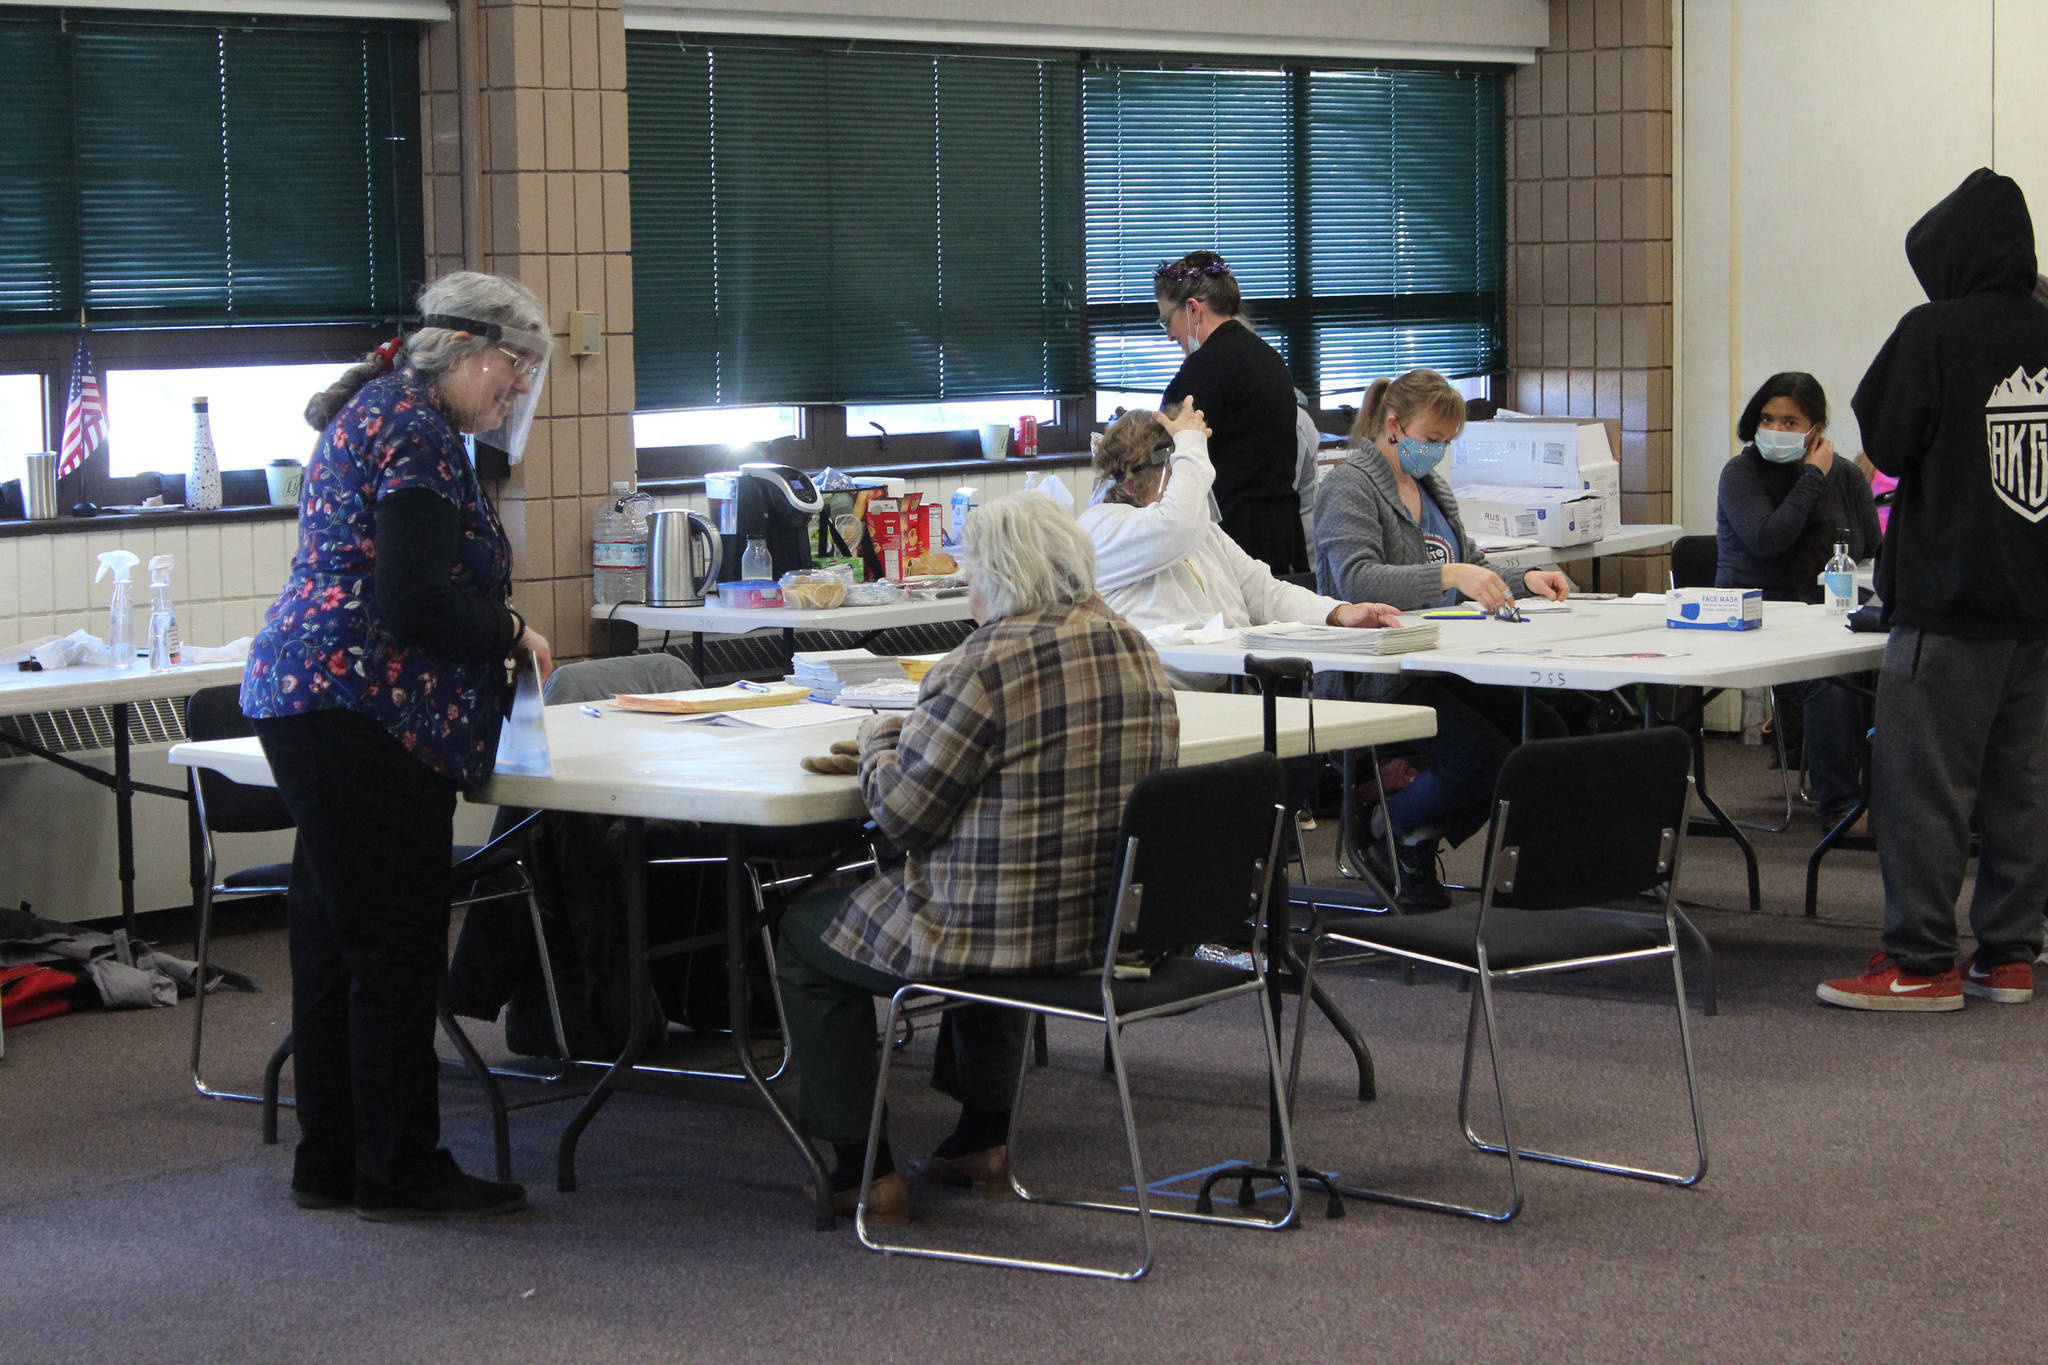 Cindy Newby (left) assists a voter with their ballot at the Soldotna Regional Sports Complex on Tuesday, Nov. 3 in Soldotna, Alaska. (Photo by Ashlyn O’Hara/Peninsula Clarion)